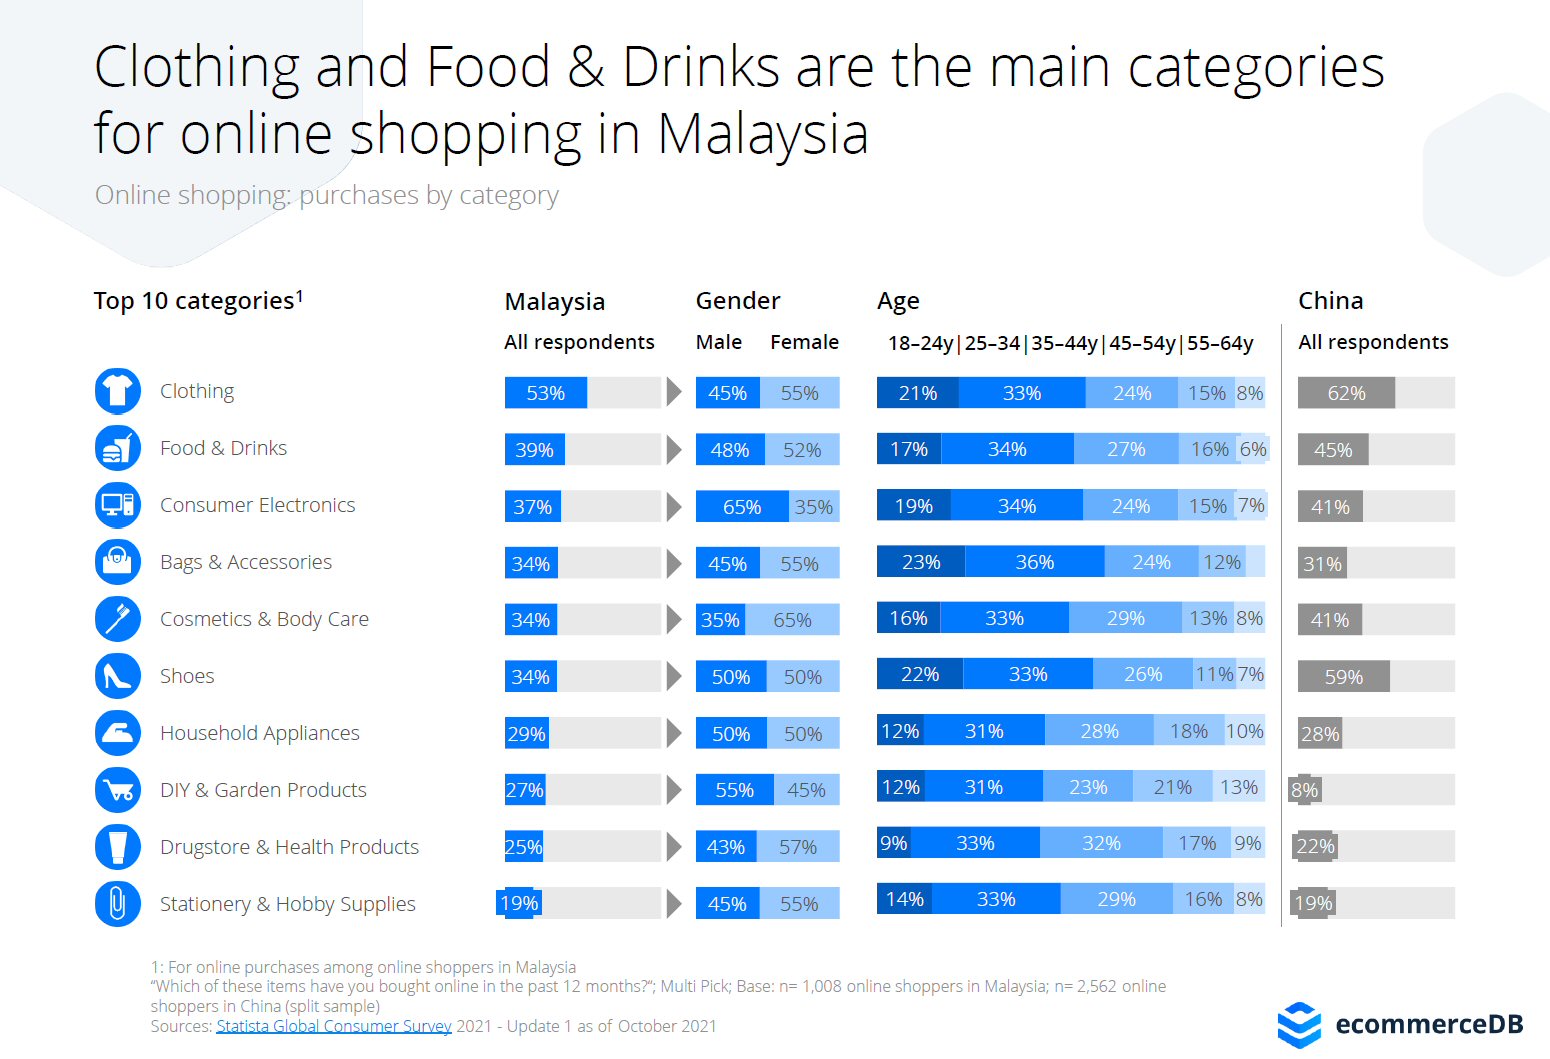 Top Online Shopping Purchases by Categories in Malaysia